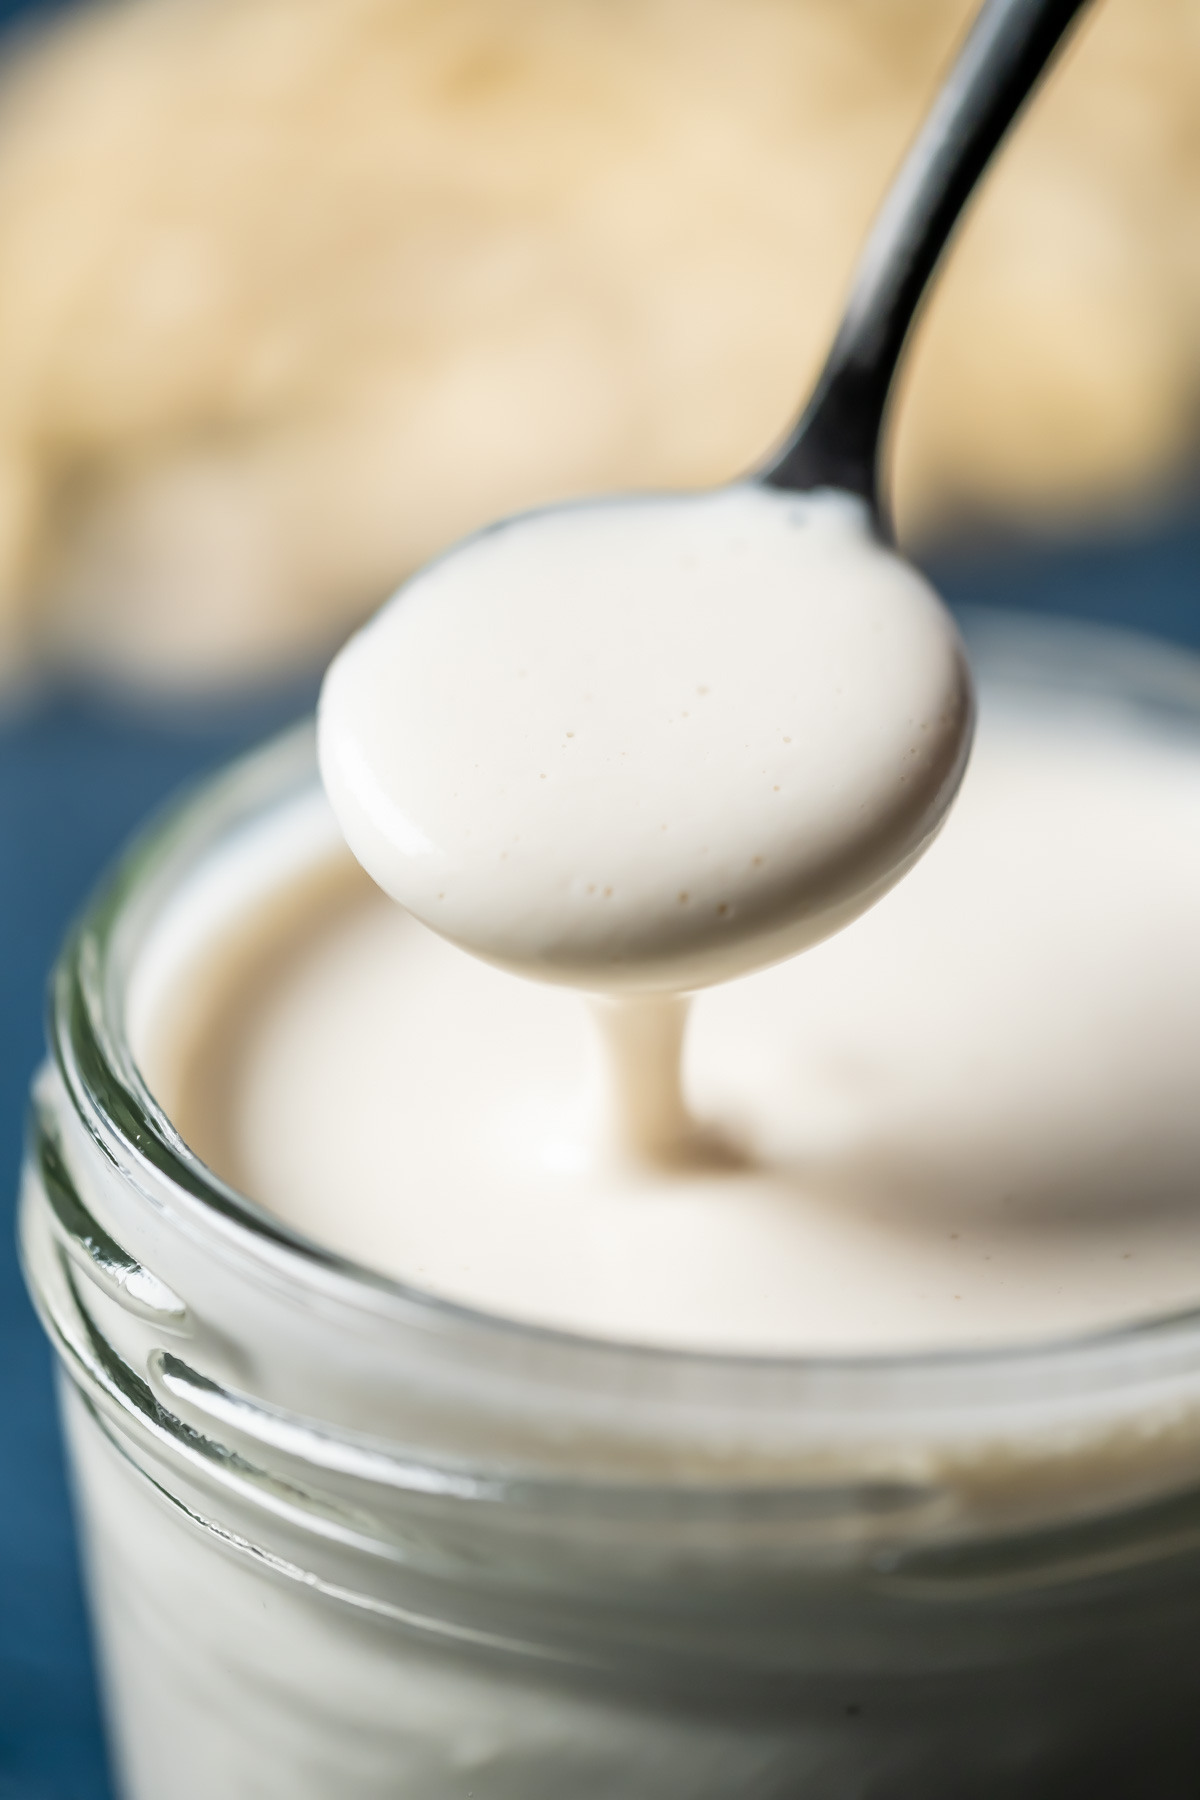 Vegan heavy cream substitute in a glass jar with a spoon.